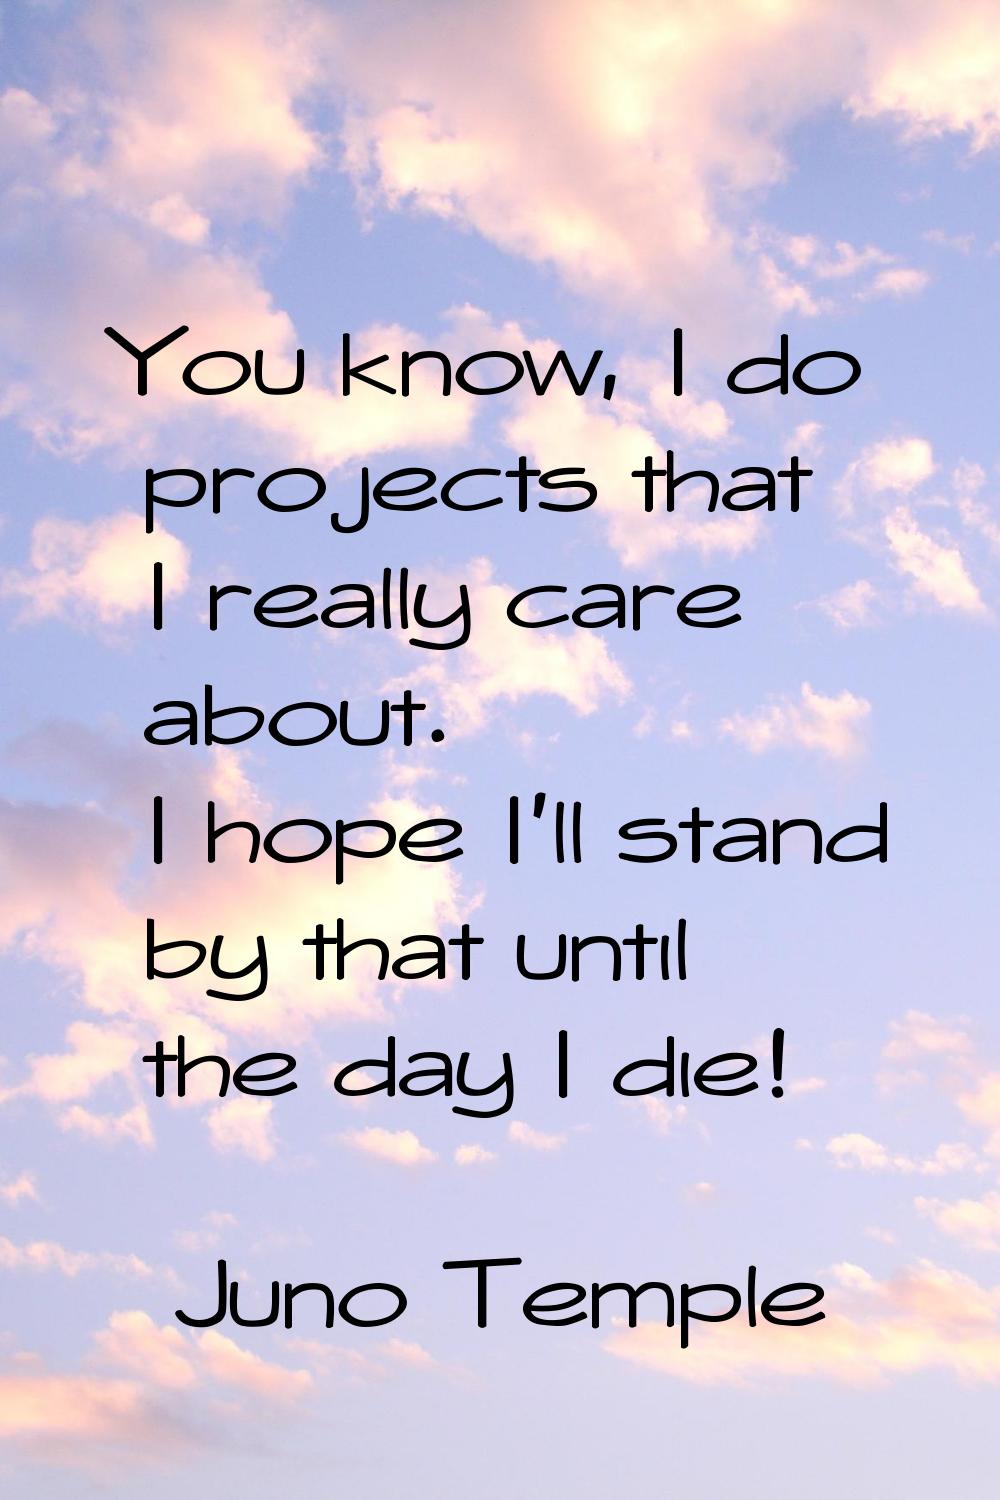 You know, I do projects that I really care about. I hope I'll stand by that until the day I die!